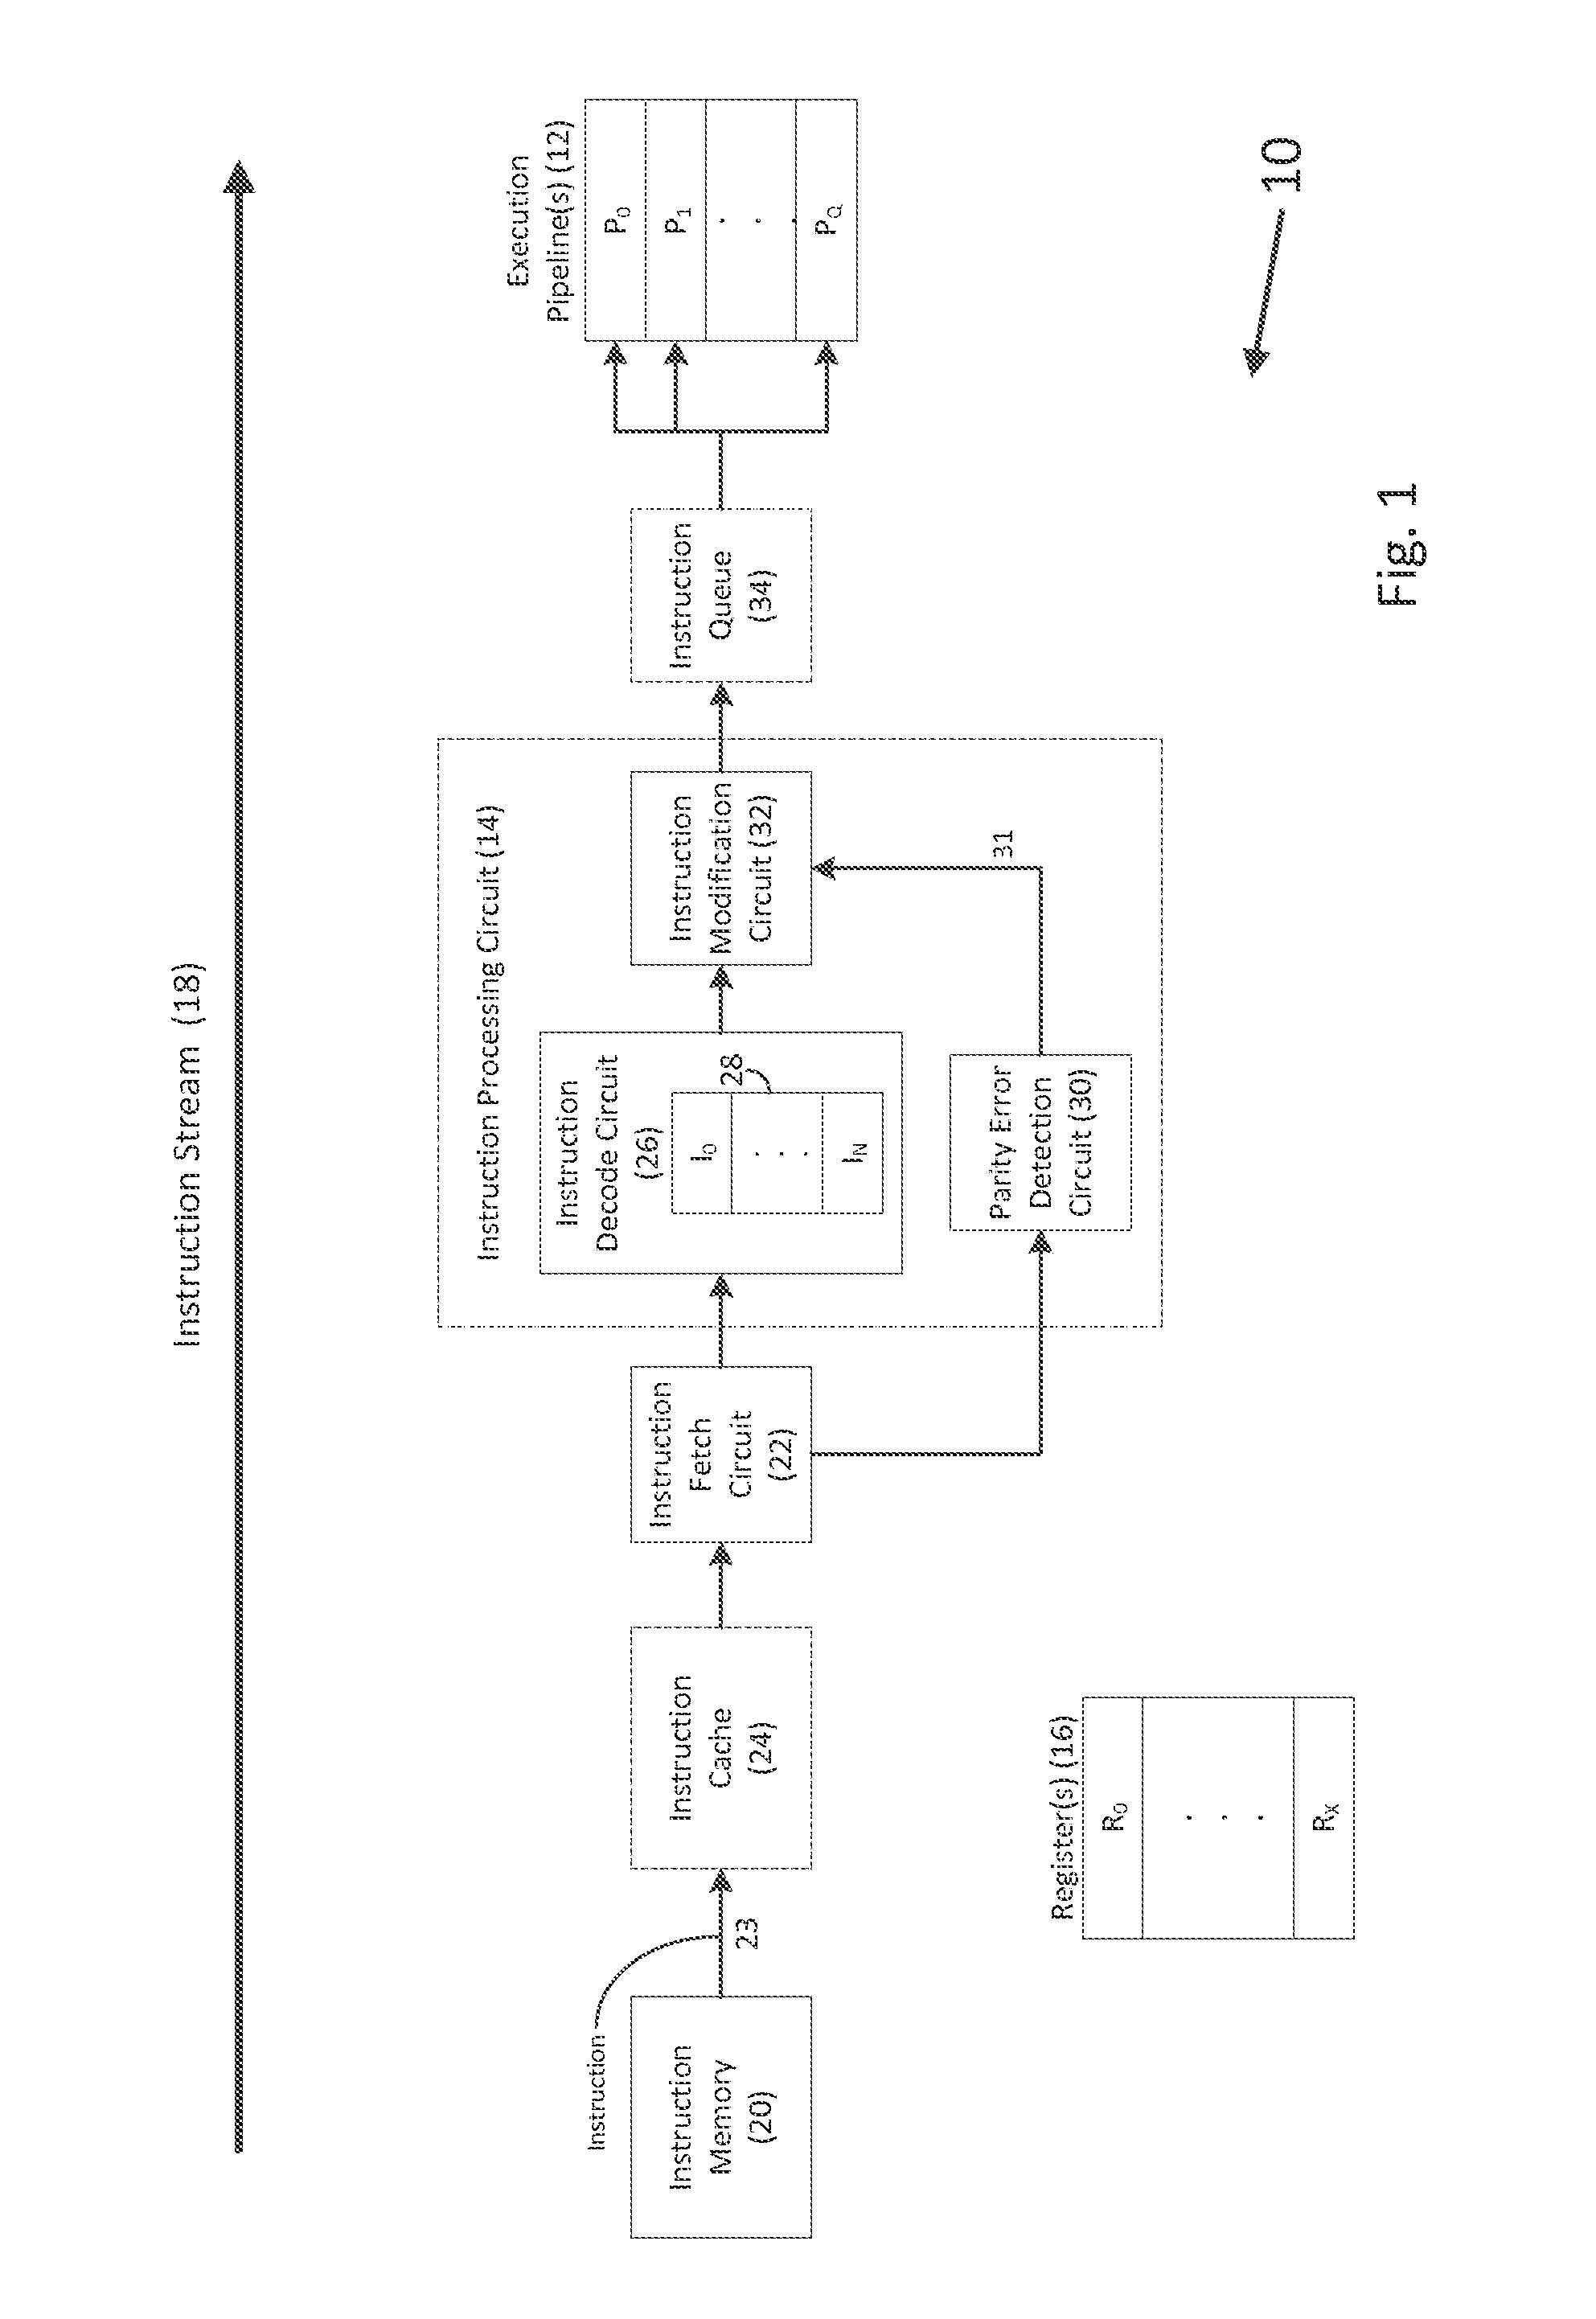 Preventing execution of parity-error-induced unpredictable instructions, and related processor systems, methods, and computer-readable media